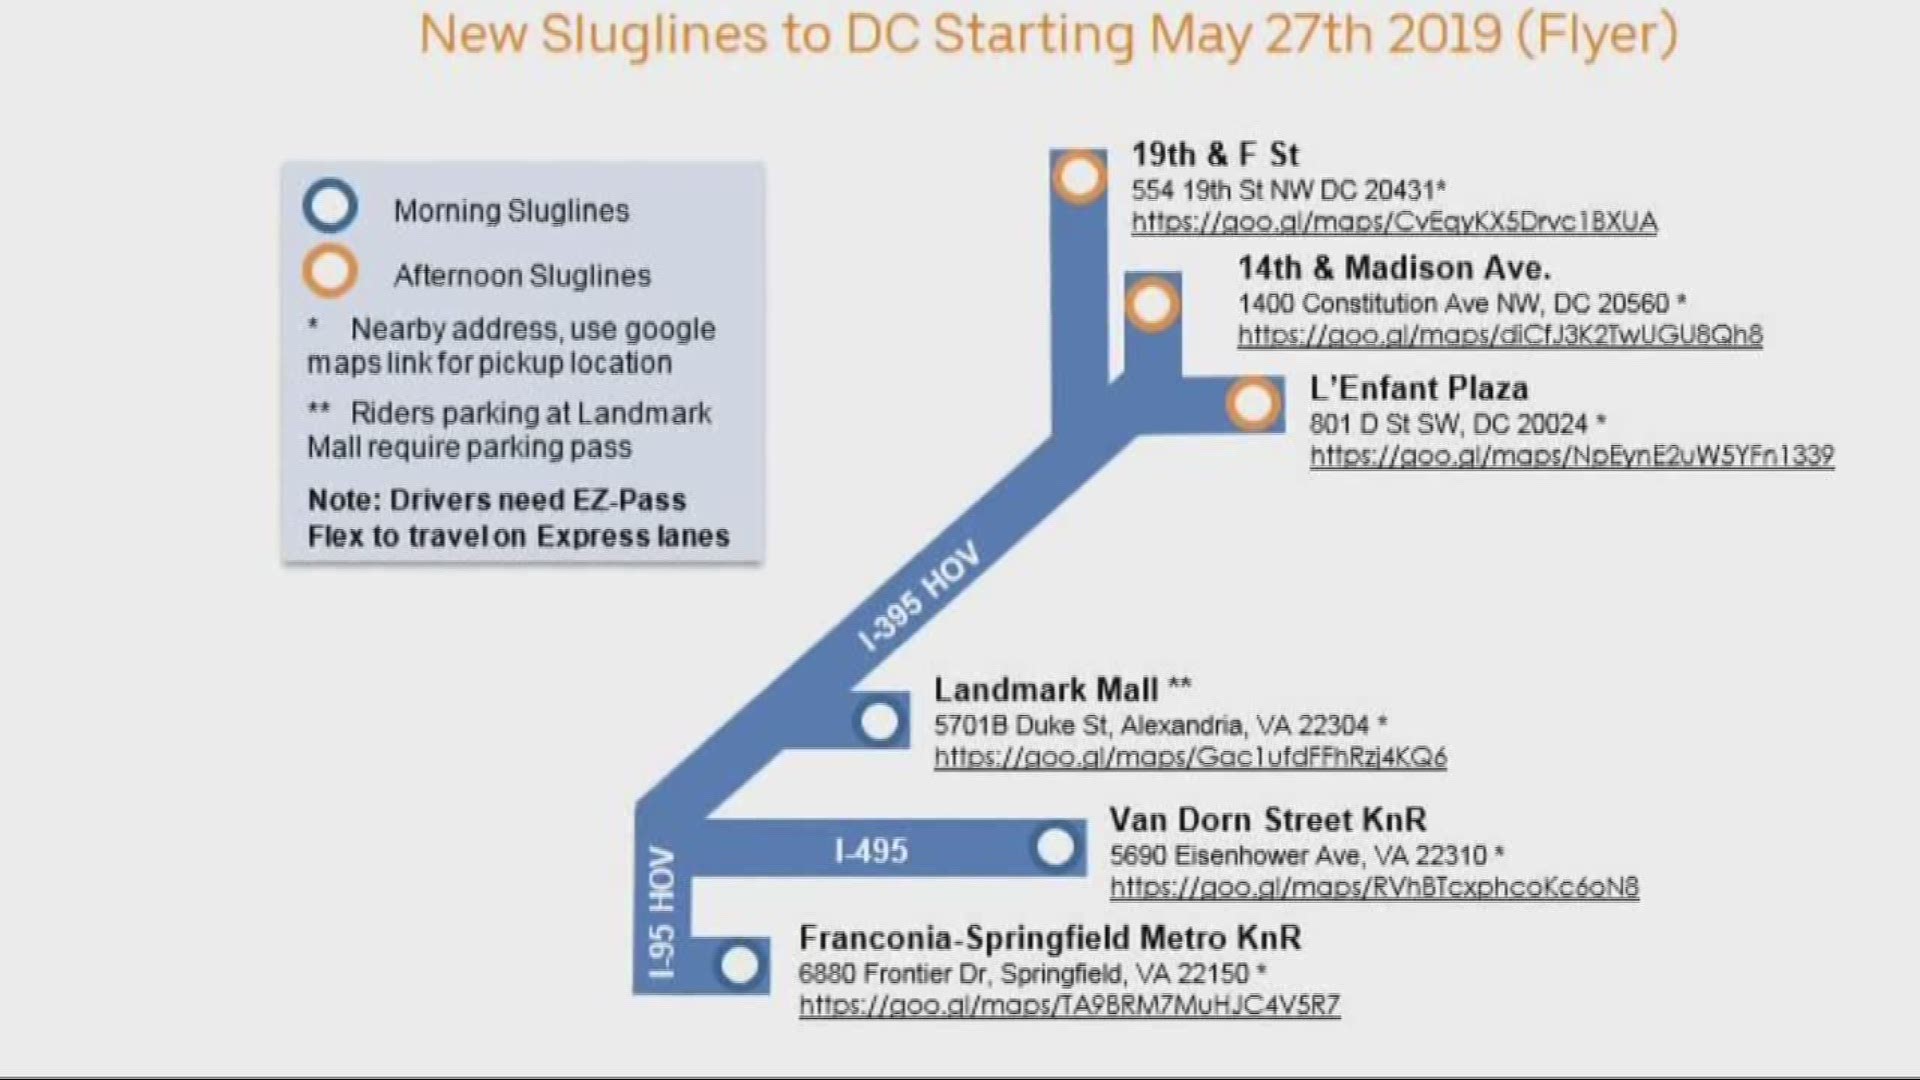 Commuters can use sluglines. They will stand in line and wait for drivers who are headed their way. The riders get a free trip into the city and the driver gets to ride in the HOV 3 lanes.